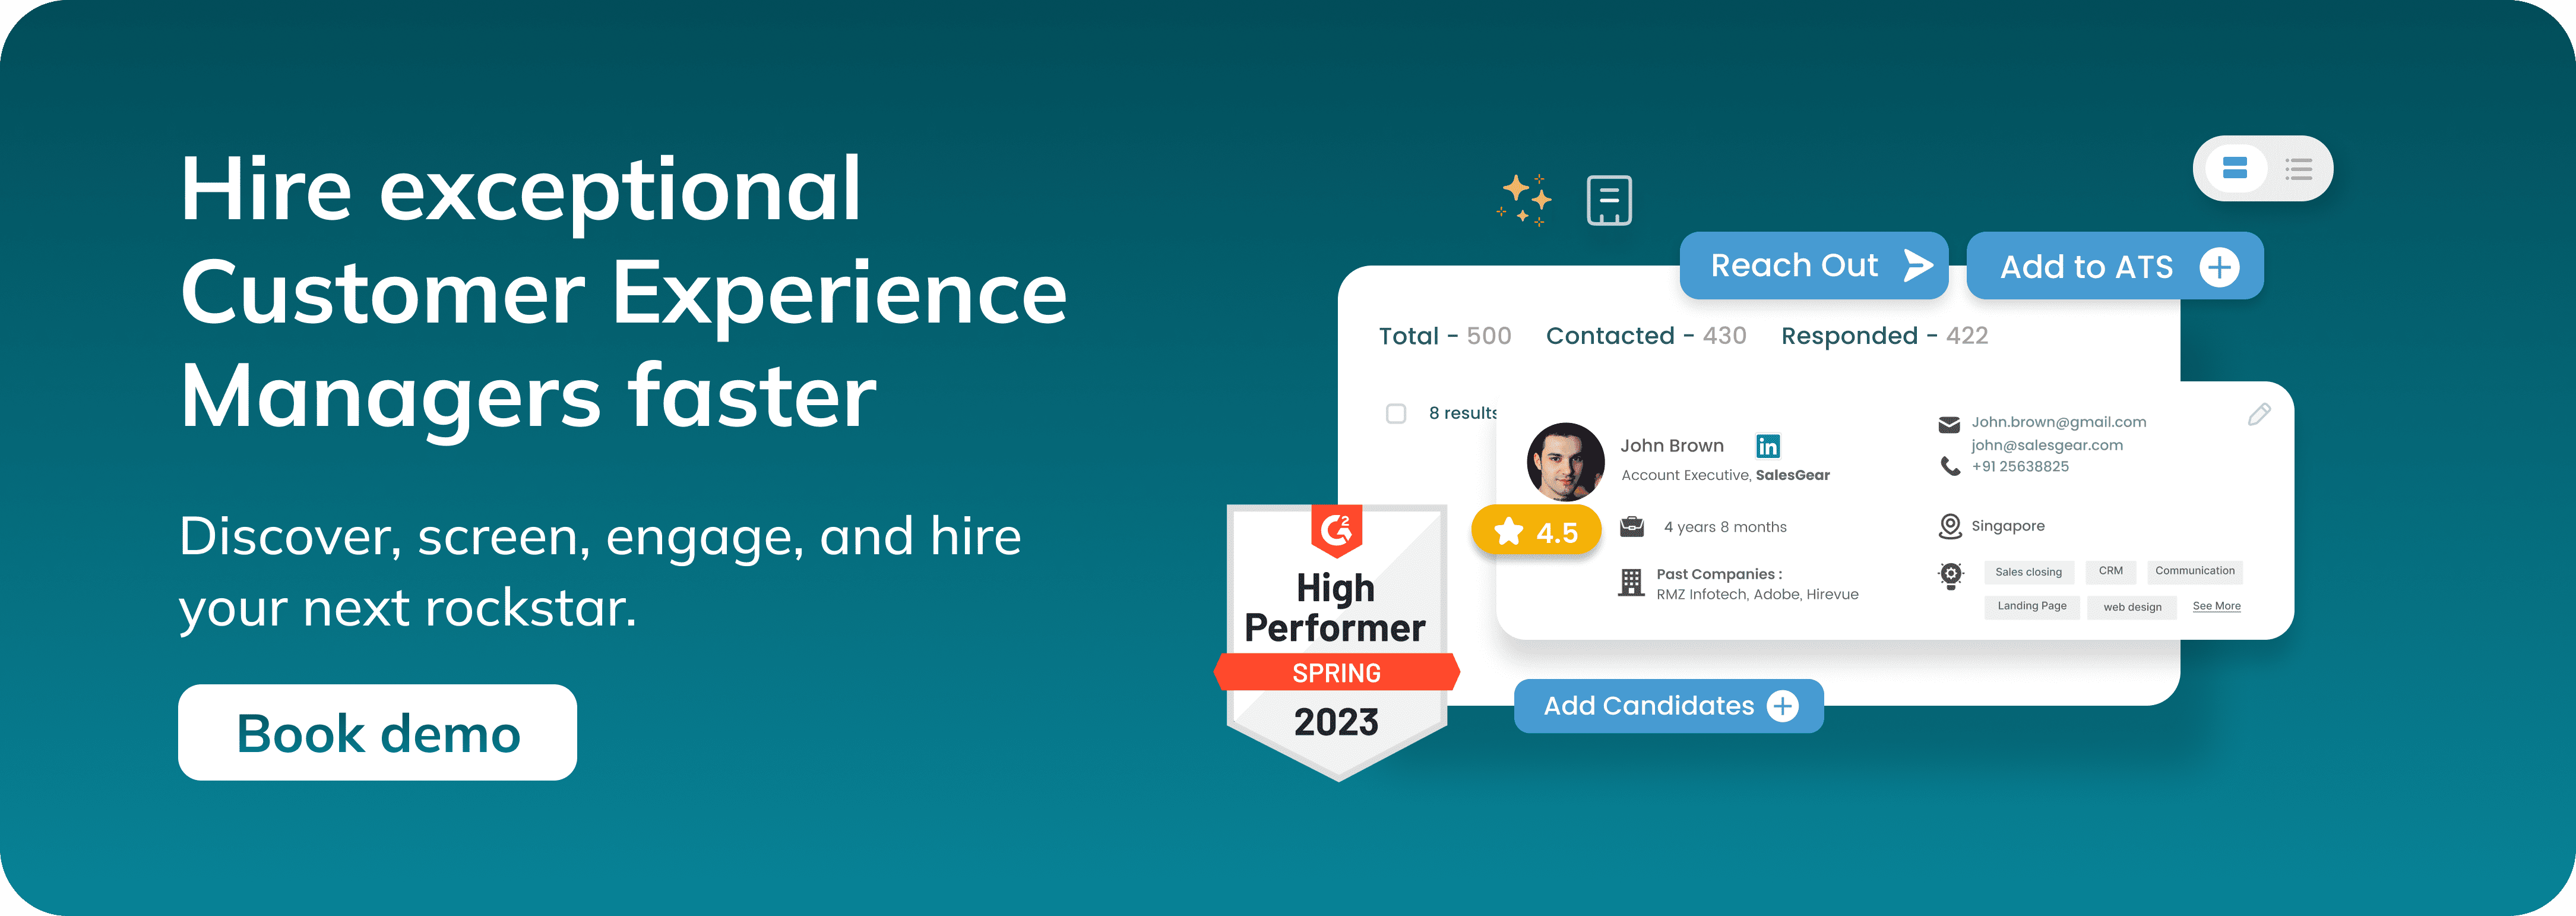 Customer Experience Manager.png